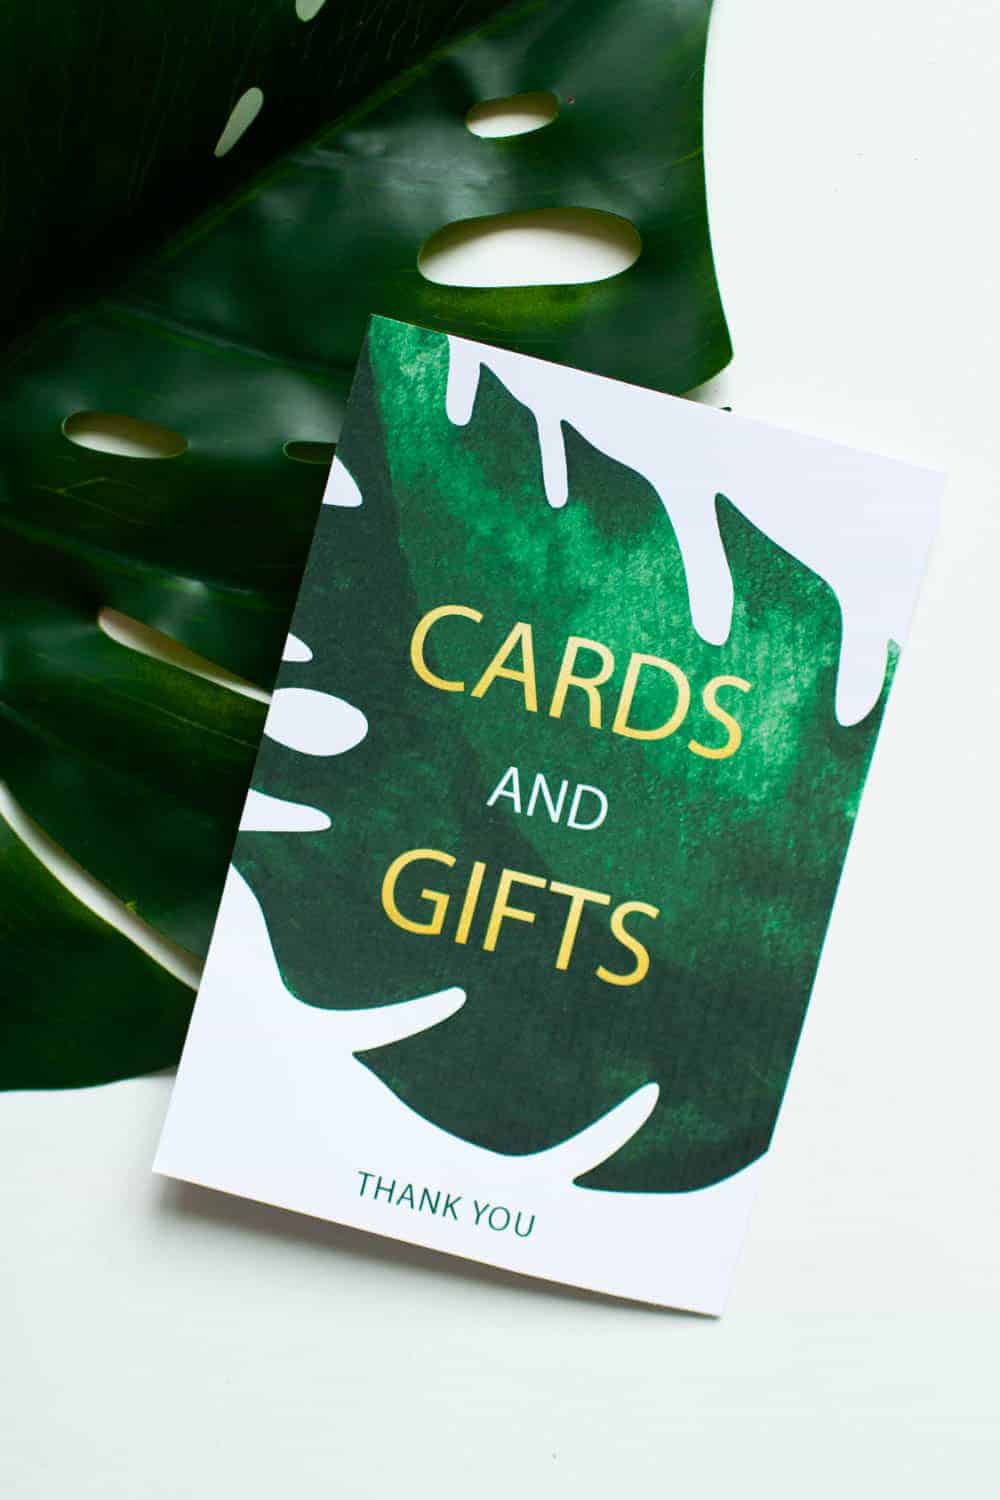 free-printable-greenery-cards-and-gifts-sign-laptrinhx-news